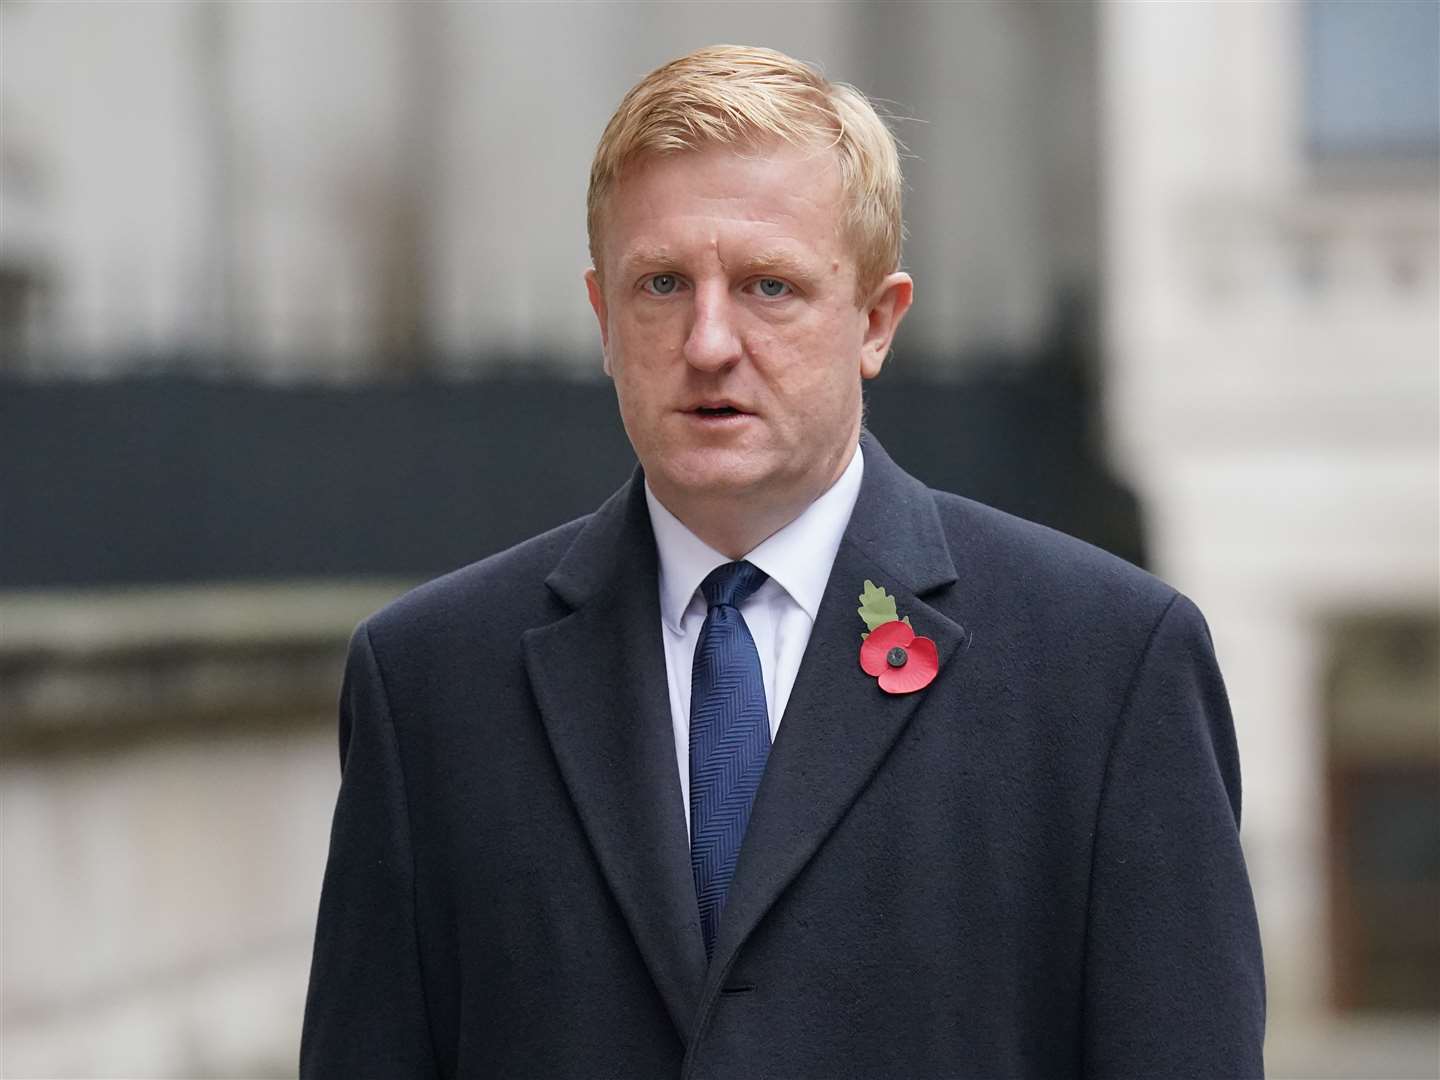 Oliver Dowden, Cabinet Office minister, will announce the ban on Thursday, it is understood (PA)